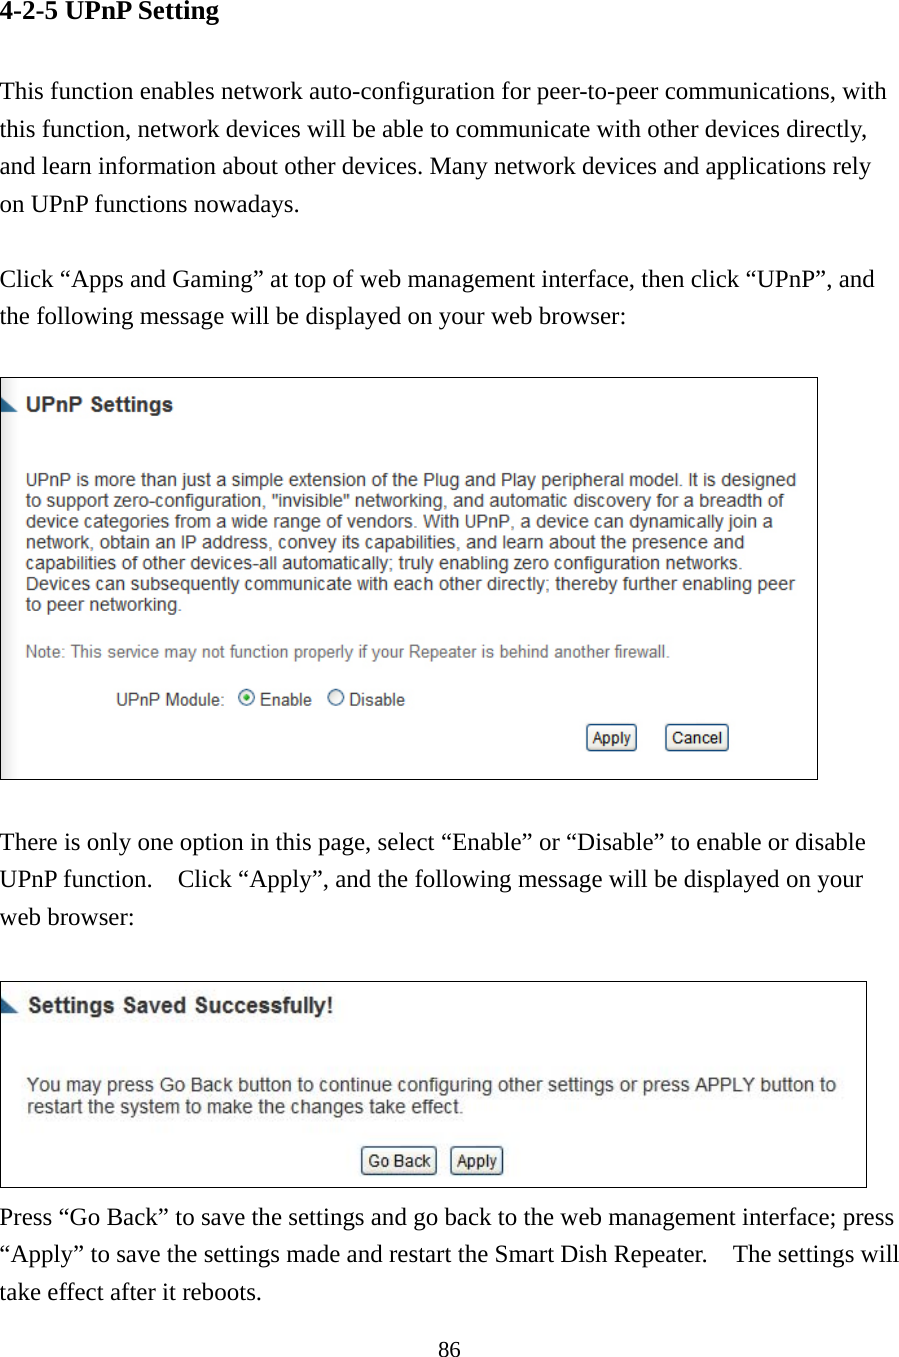 86 4-2-5 UPnP Setting  This function enables network auto-configuration for peer-to-peer communications, with this function, network devices will be able to communicate with other devices directly, and learn information about other devices. Many network devices and applications rely on UPnP functions nowadays.  Click “Apps and Gaming” at top of web management interface, then click “UPnP”, and the following message will be displayed on your web browser:    There is only one option in this page, select “Enable” or “Disable” to enable or disable UPnP function.    Click “Apply”, and the following message will be displayed on your web browser:   Press “Go Back” to save the settings and go back to the web management interface; press “Apply” to save the settings made and restart the Smart Dish Repeater.    The settings will take effect after it reboots. 